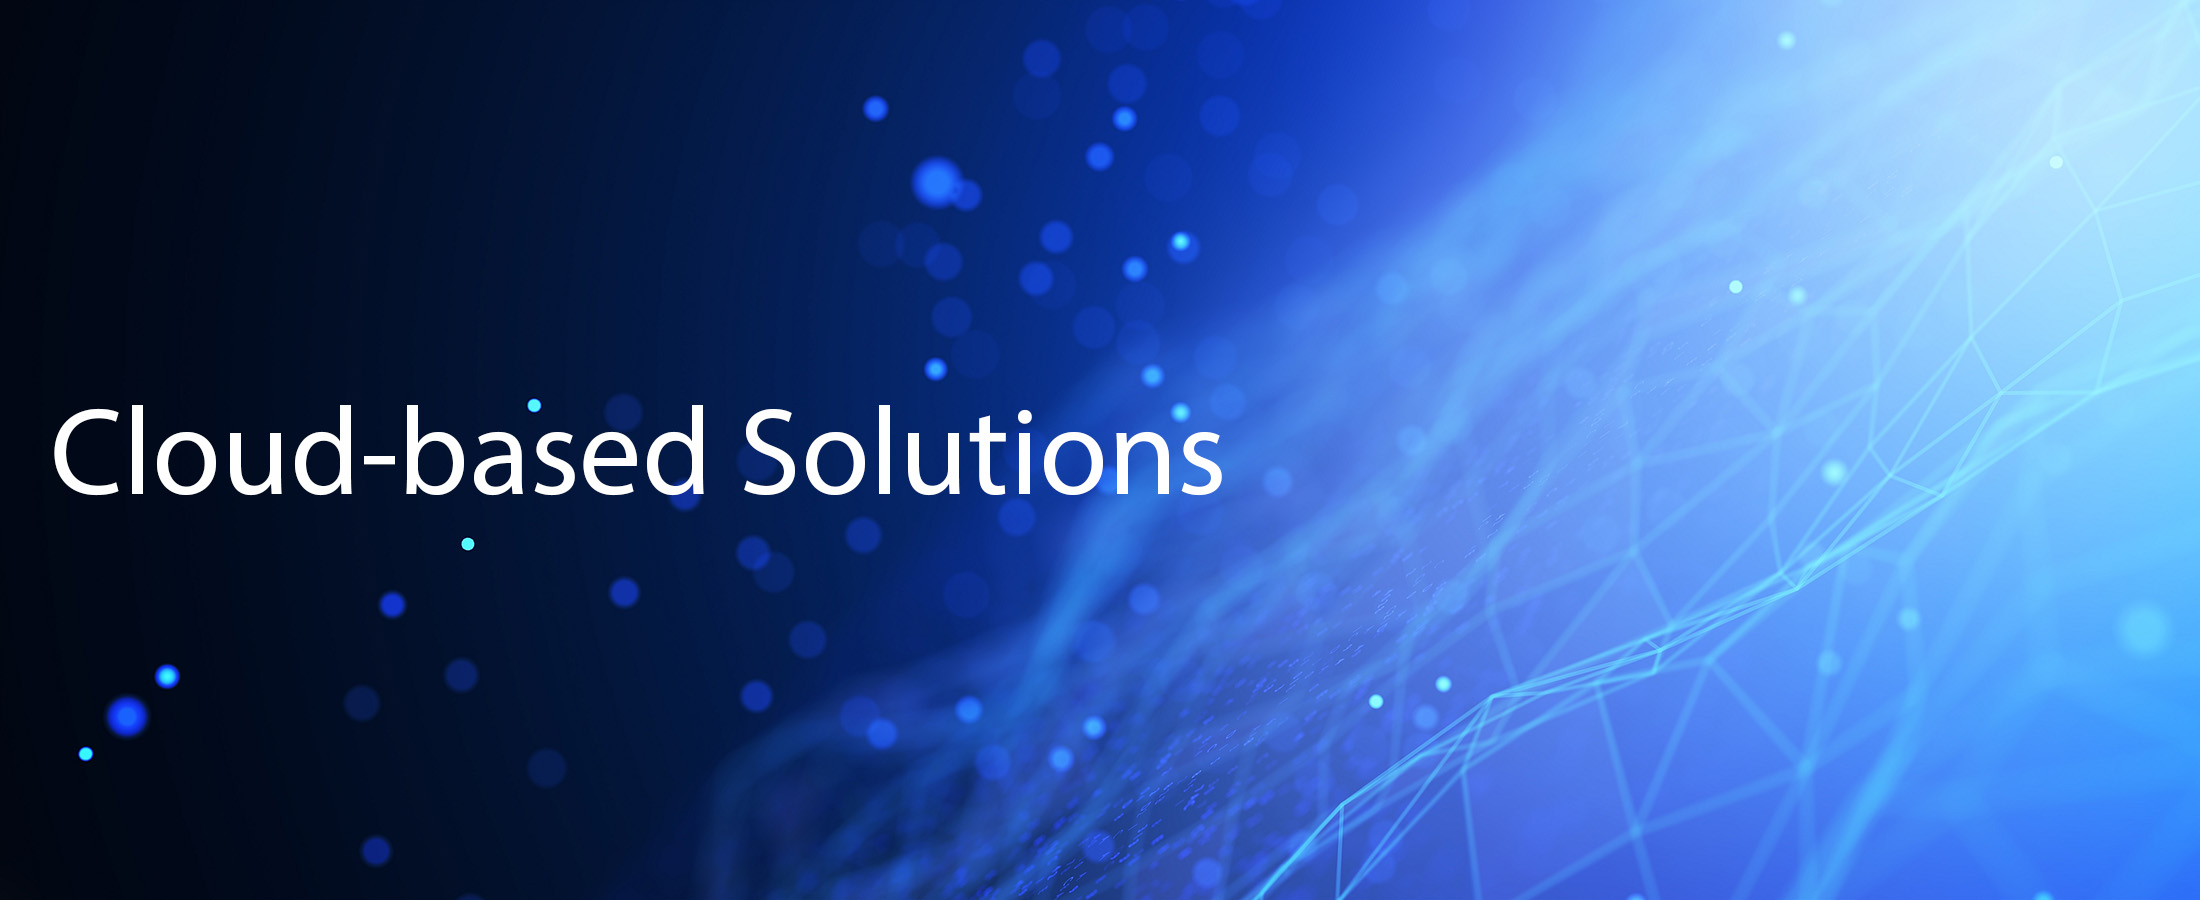 Cloud-based Solutions